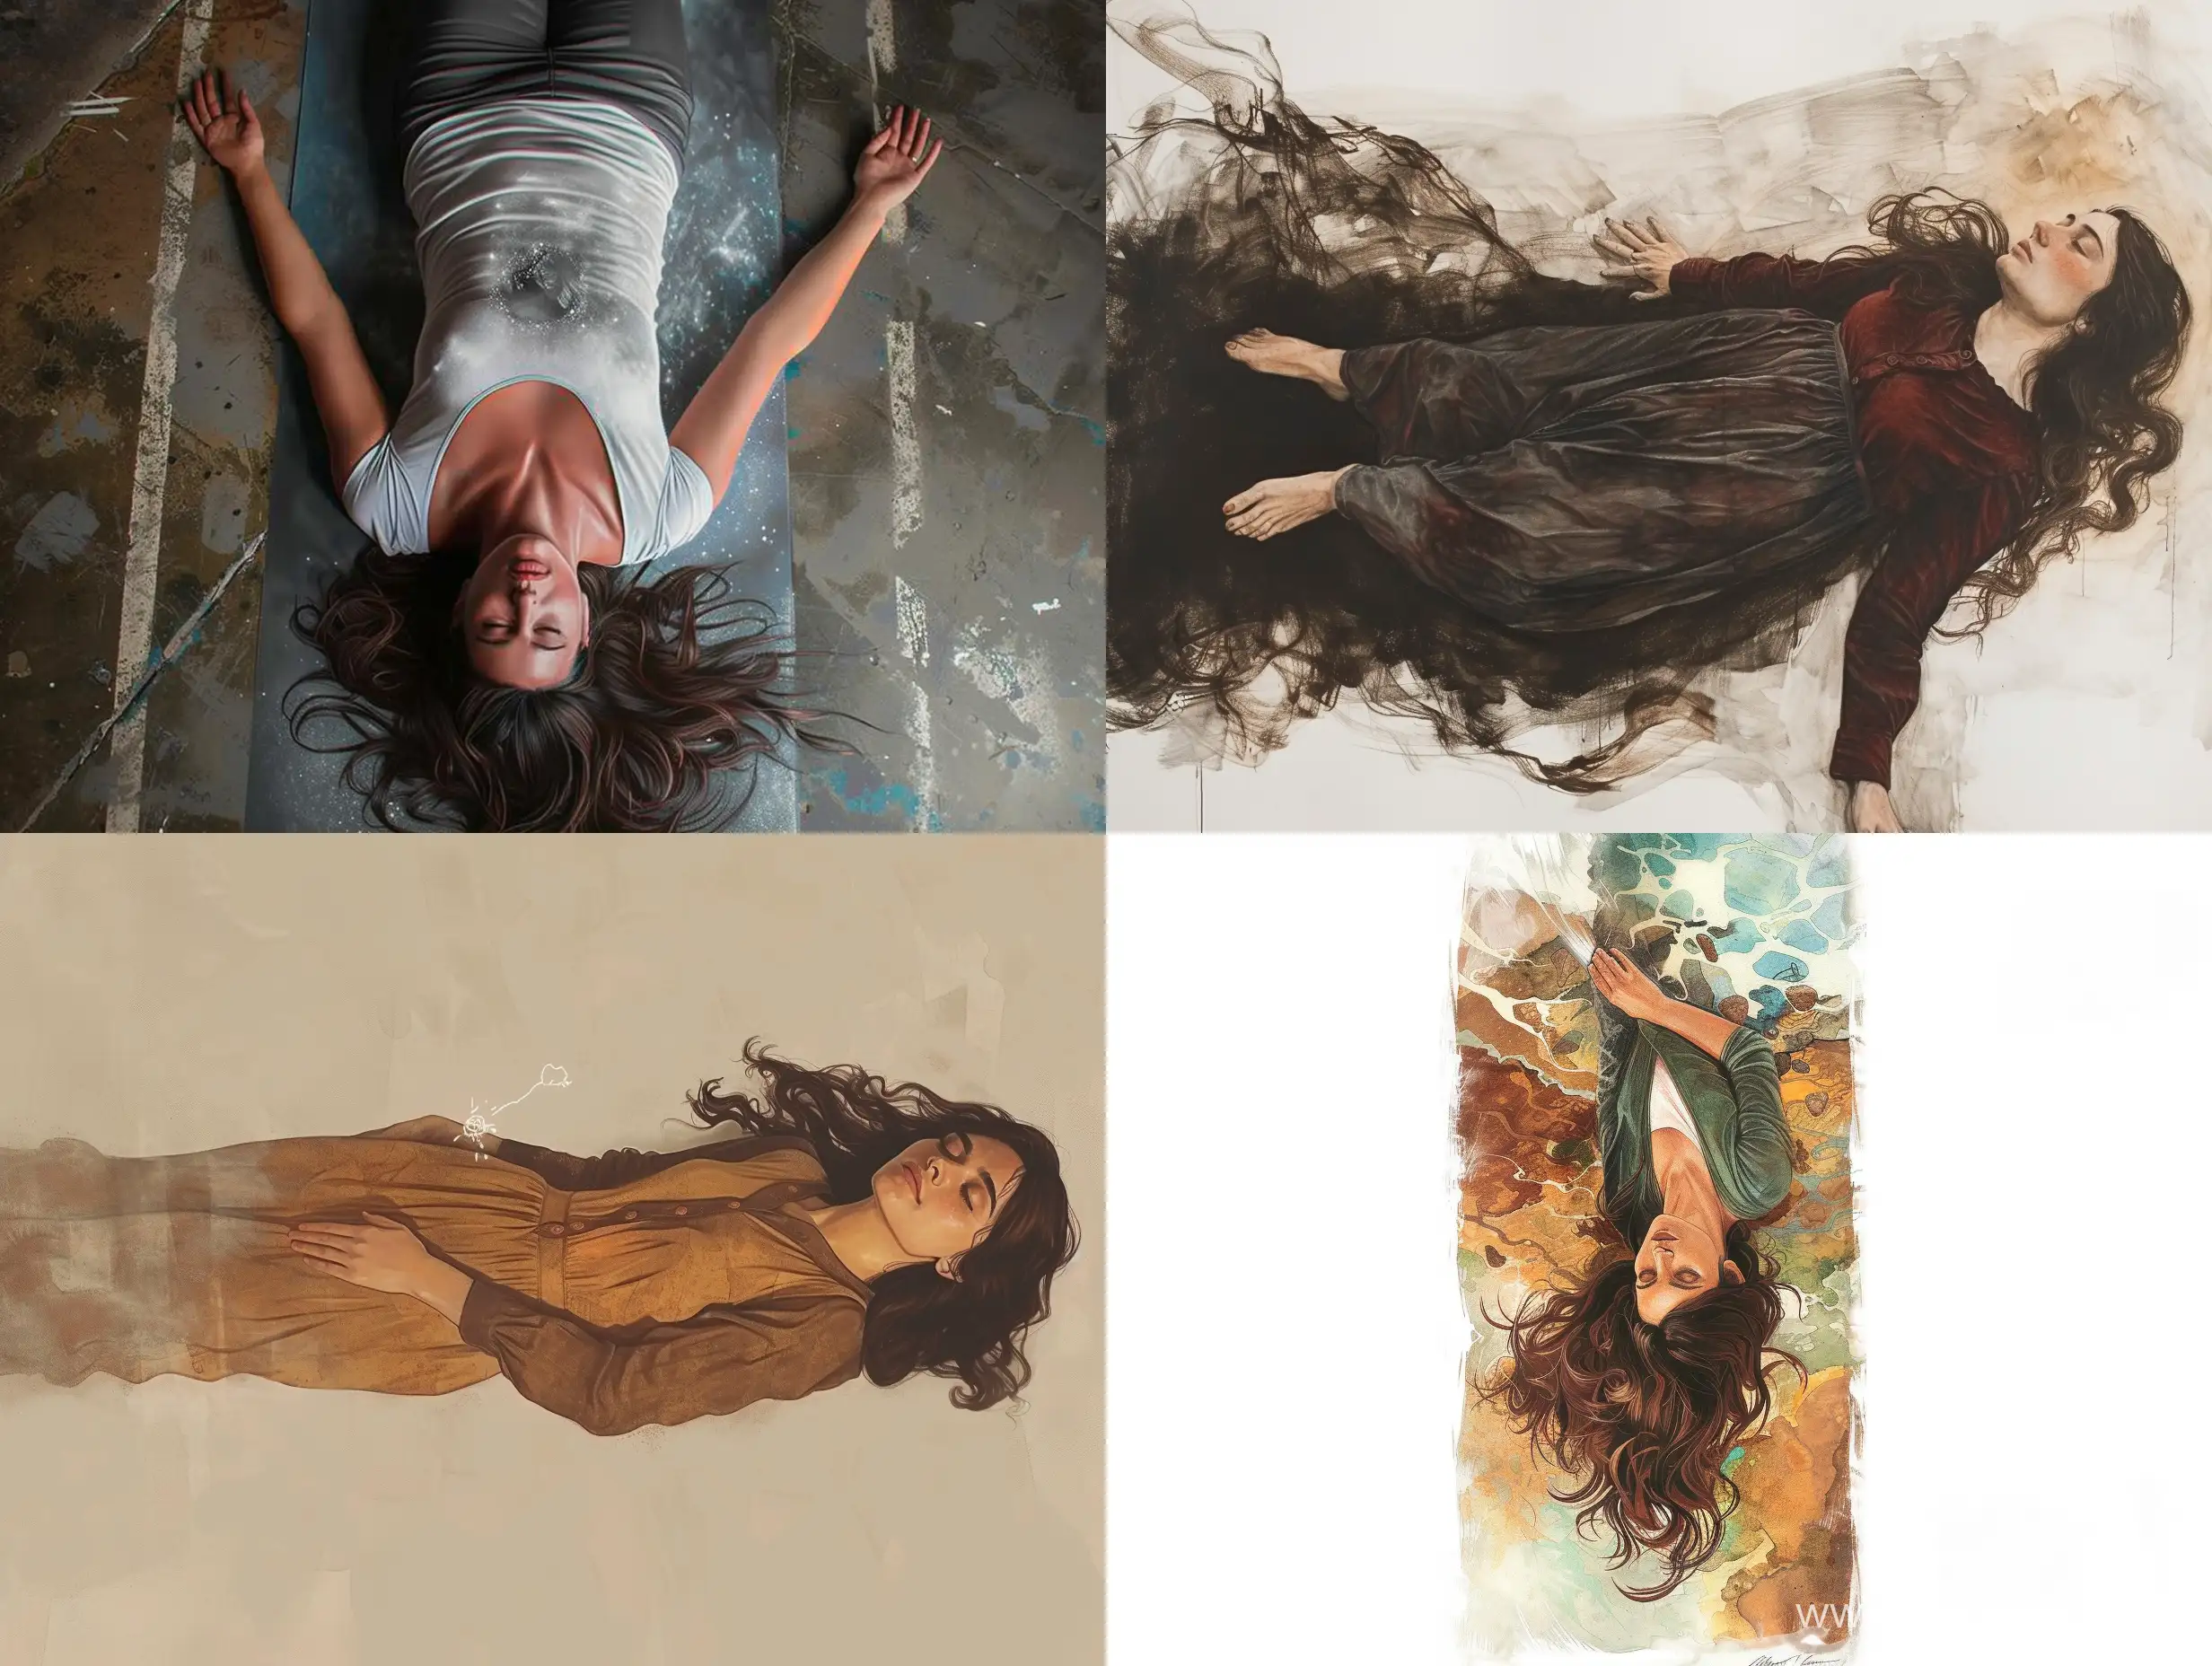 draw a vertical image of a brunette woman laying on the ground and her spirit is floating outside of her body